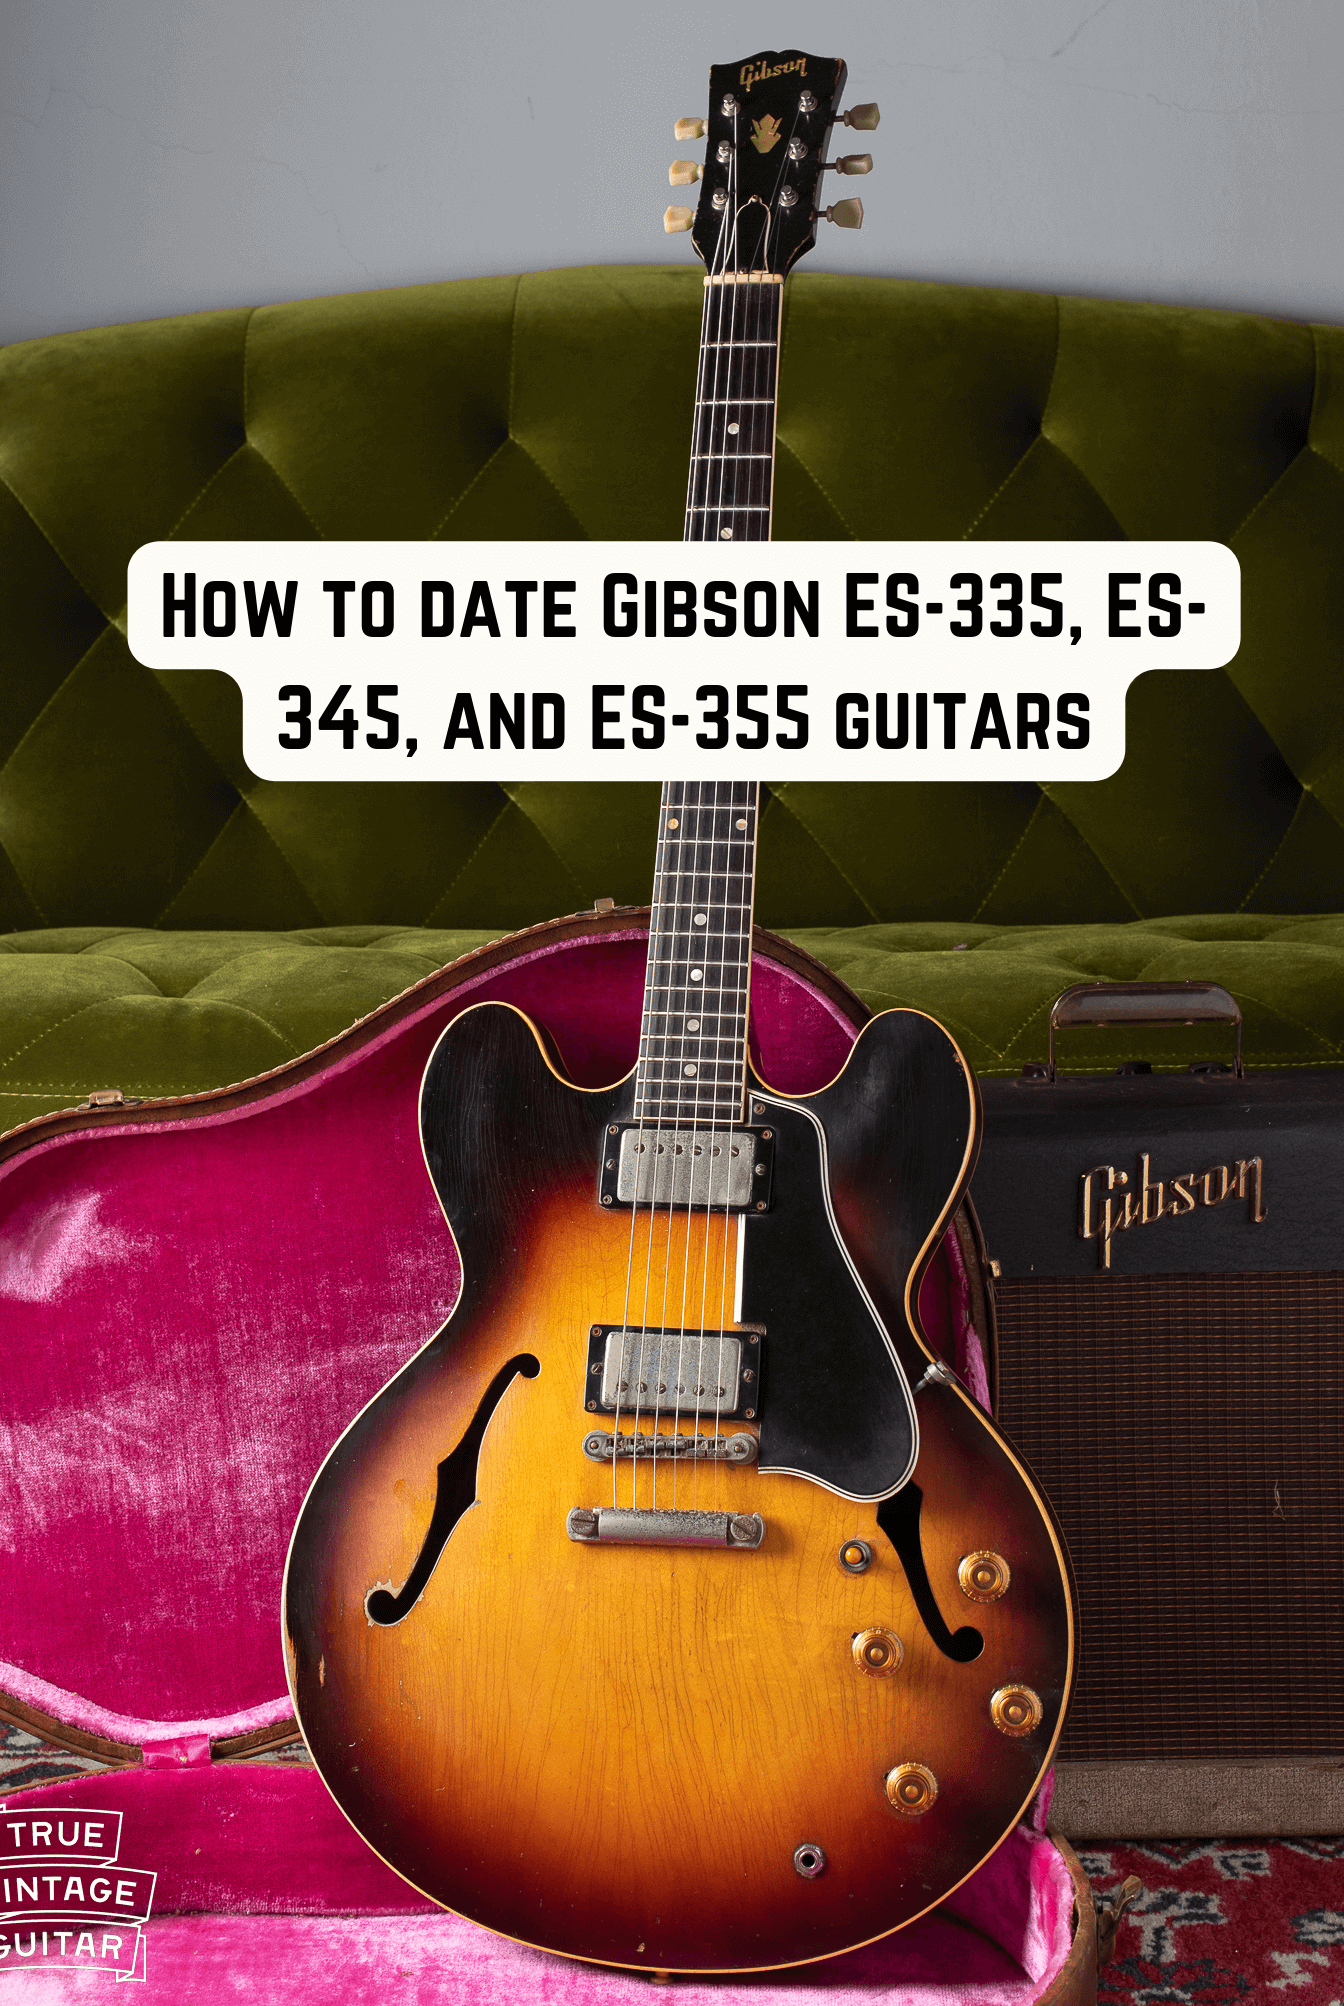 How to date Gibson ES-335 guitars serial numbers